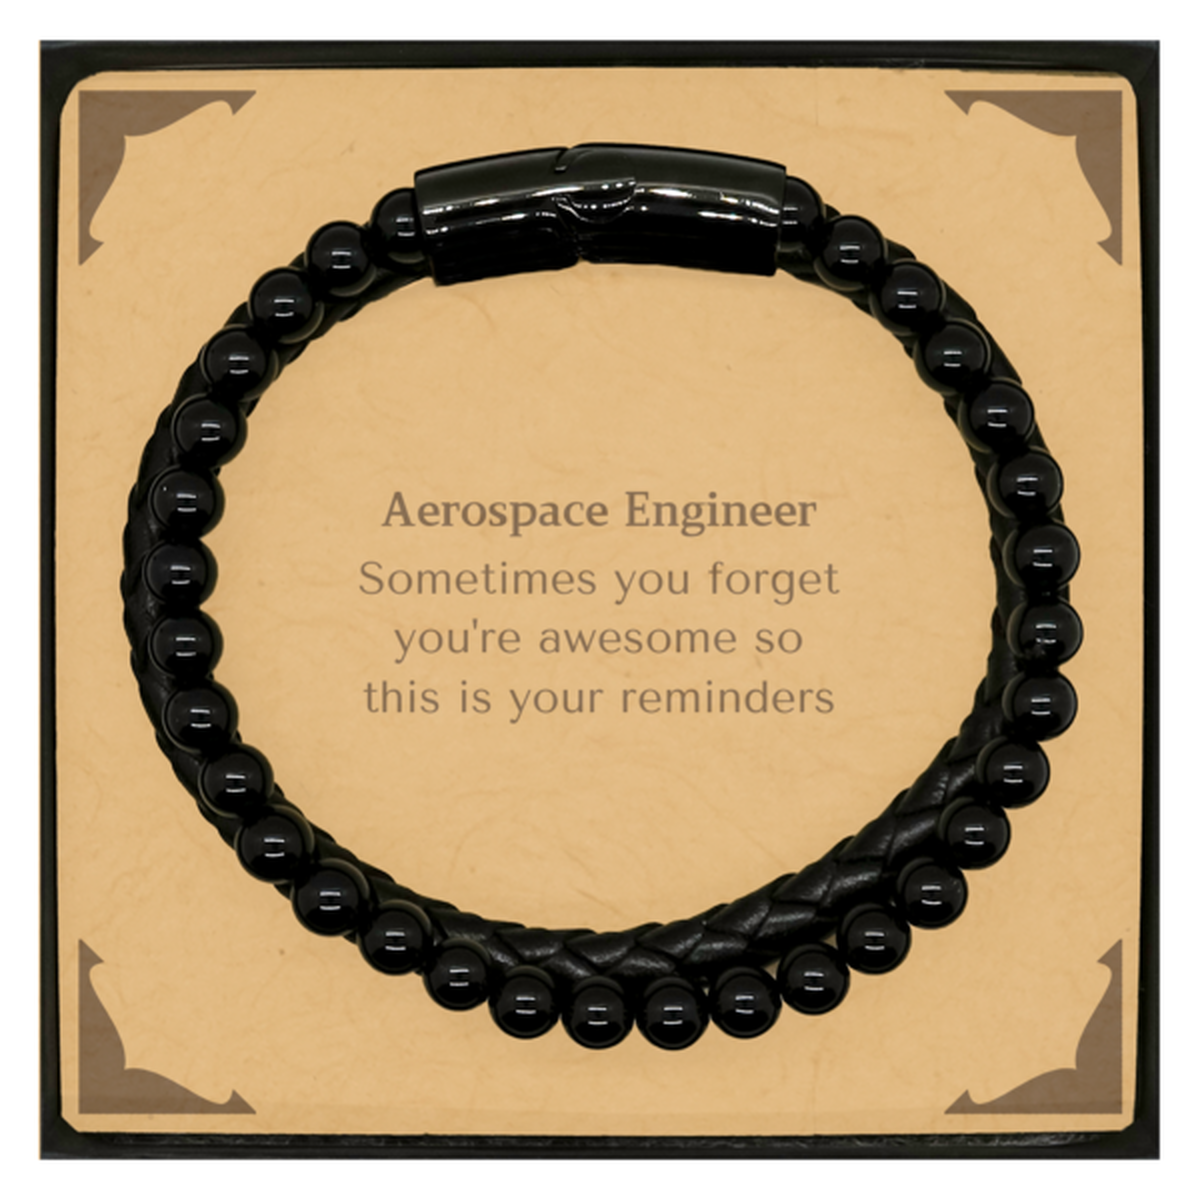 Sentimental Aerospace Engineer Stone Leather Bracelets, Aerospace Engineer Sometimes you forget you're awesome so this is your reminders, Graduation Christmas Birthday Gifts for Aerospace Engineer, Men, Women, Coworkers